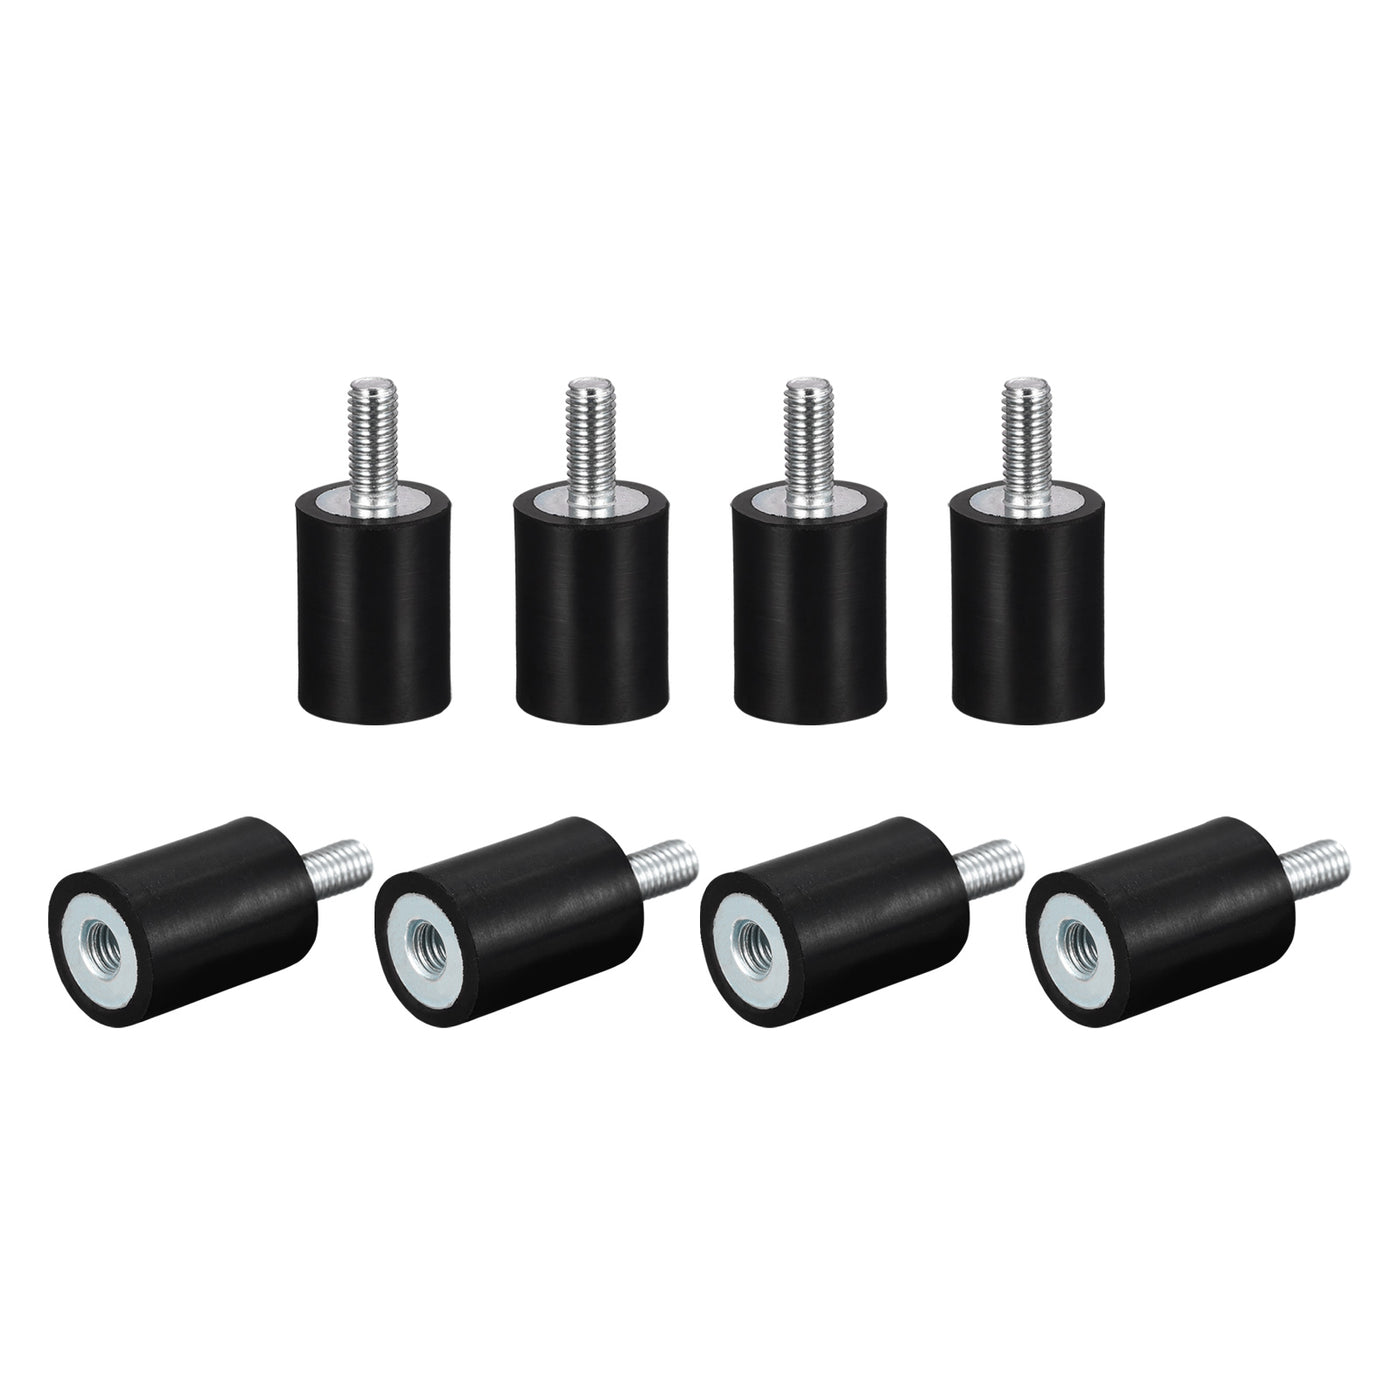 uxcell Uxcell Rubber Mount 8pcs M5 Male/Female Vibration Isolator Shock Absorber, D15mmxH20mm